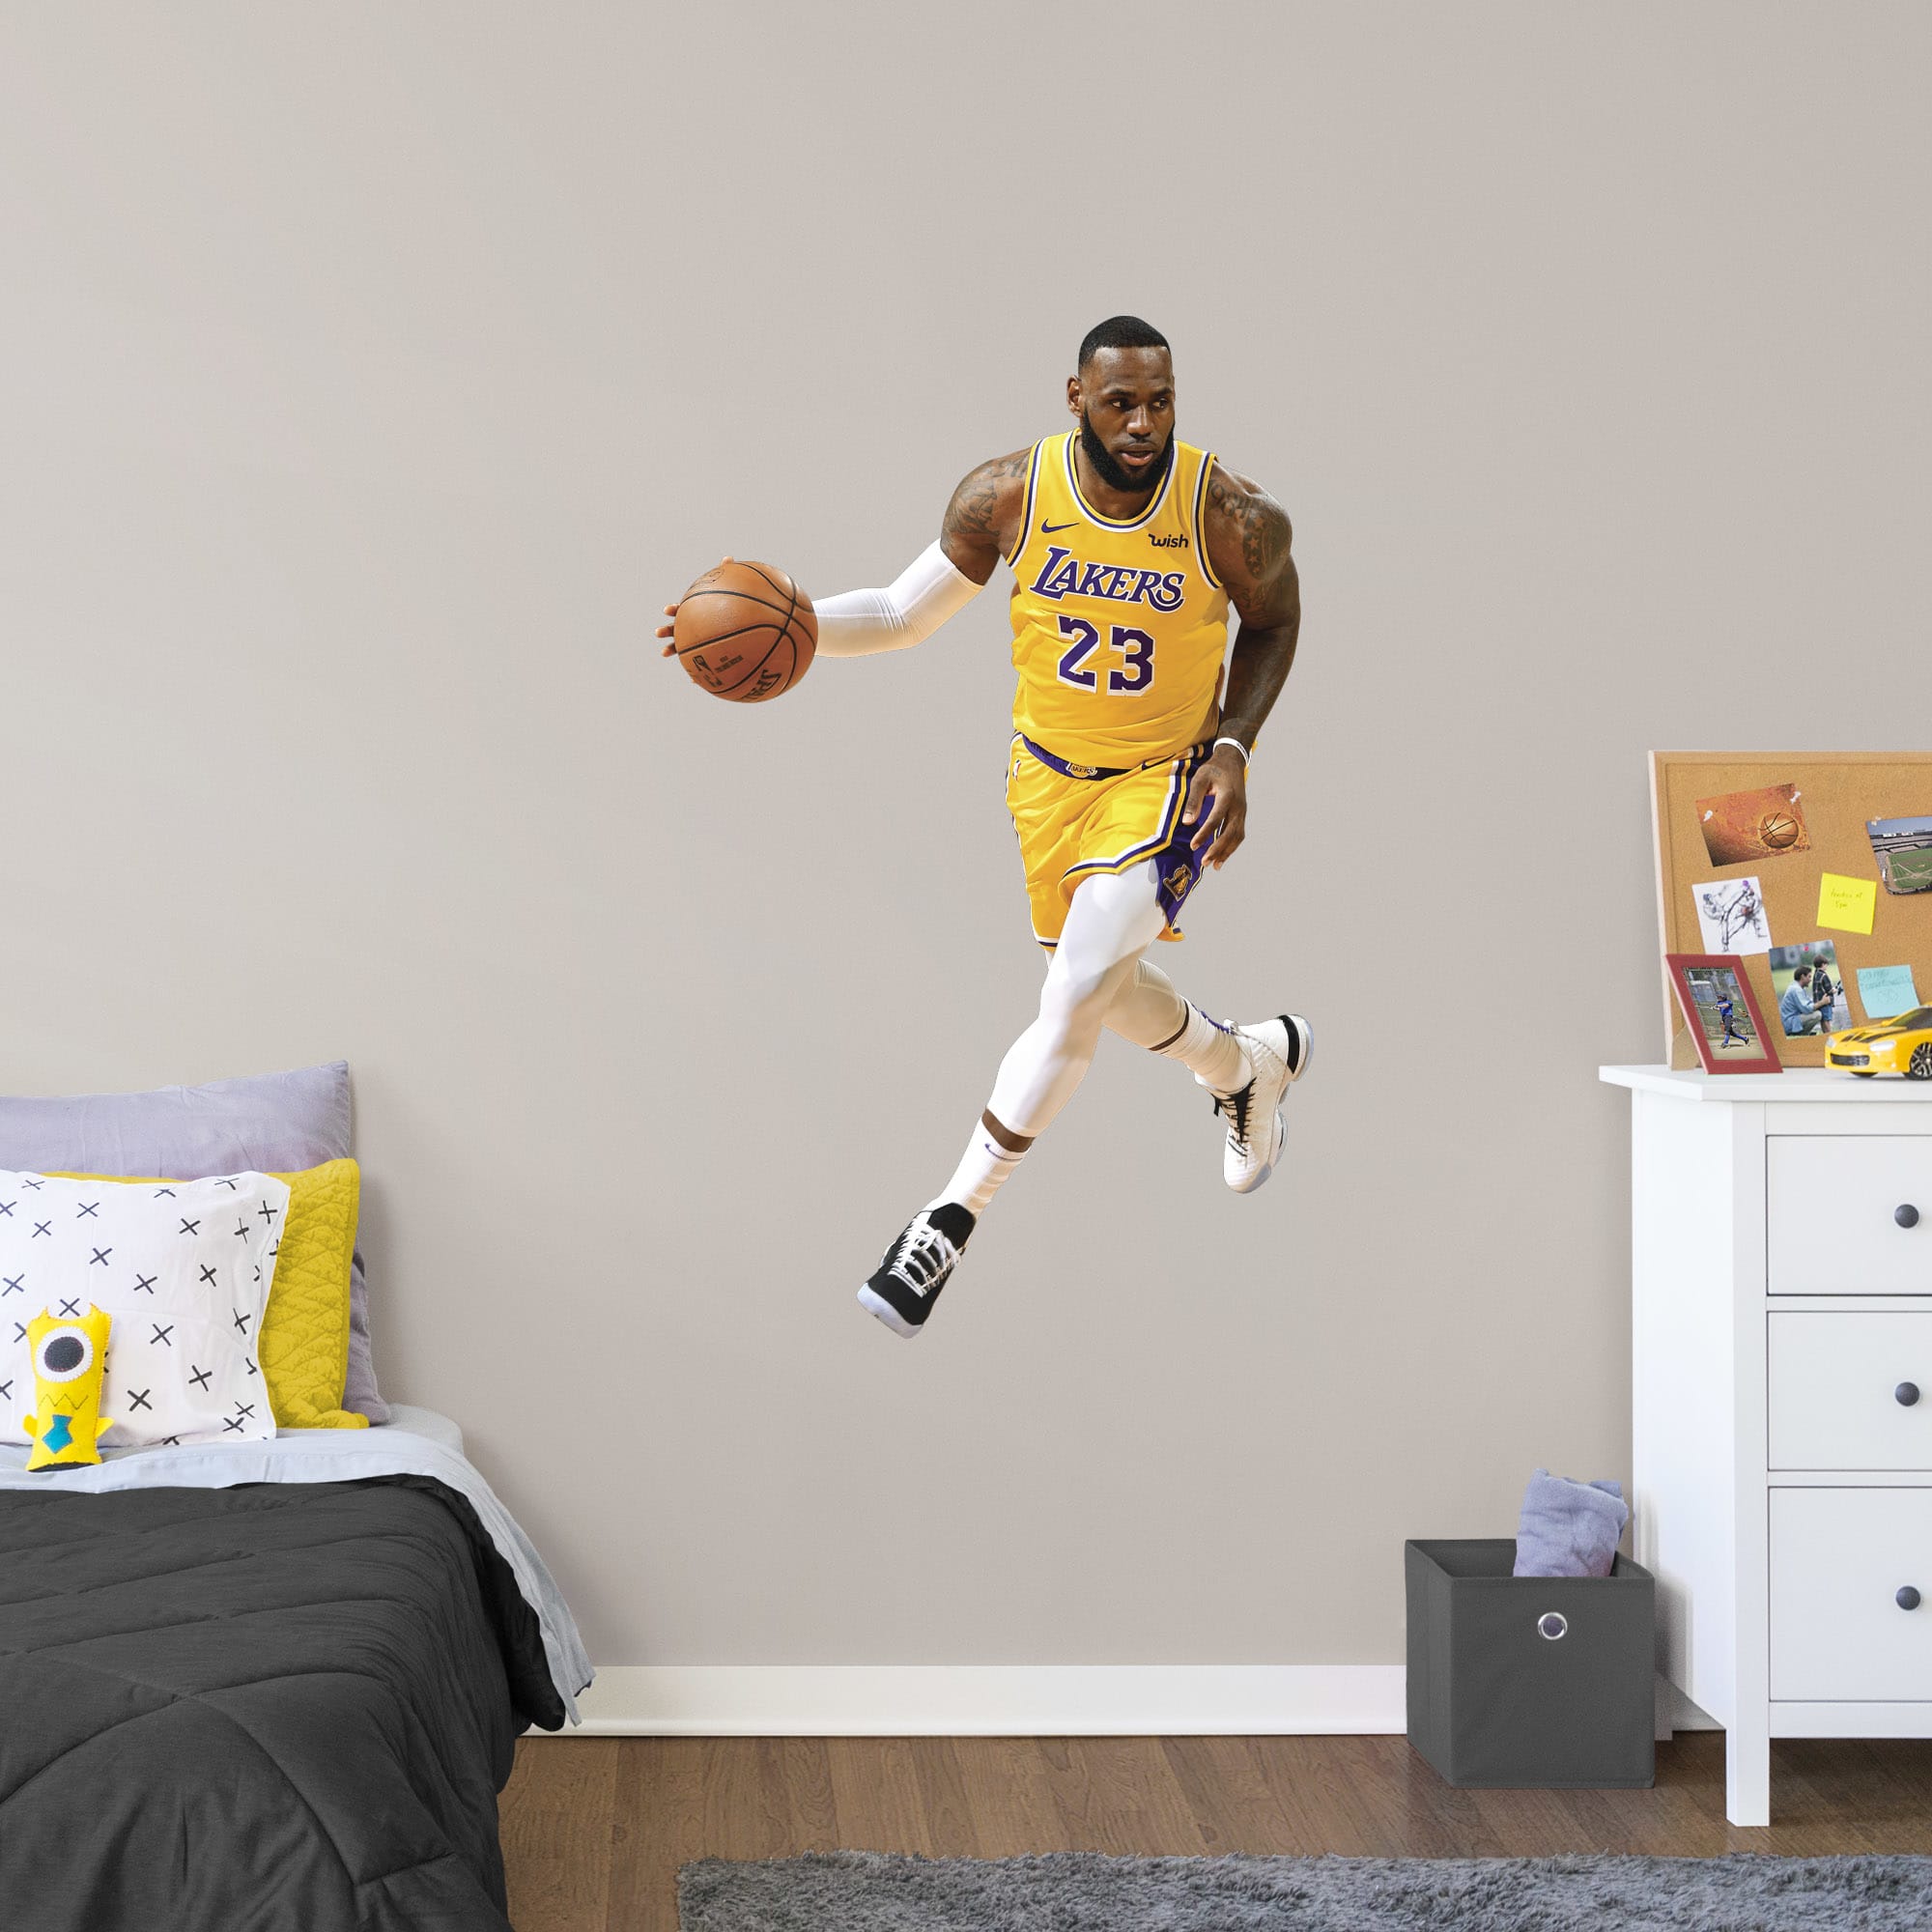 LeBron James for Los Angeles Lakers: Fast Break - Officially Licensed NBA Removable Wall Decal Giant Athlete + 2 Decals (33"W x